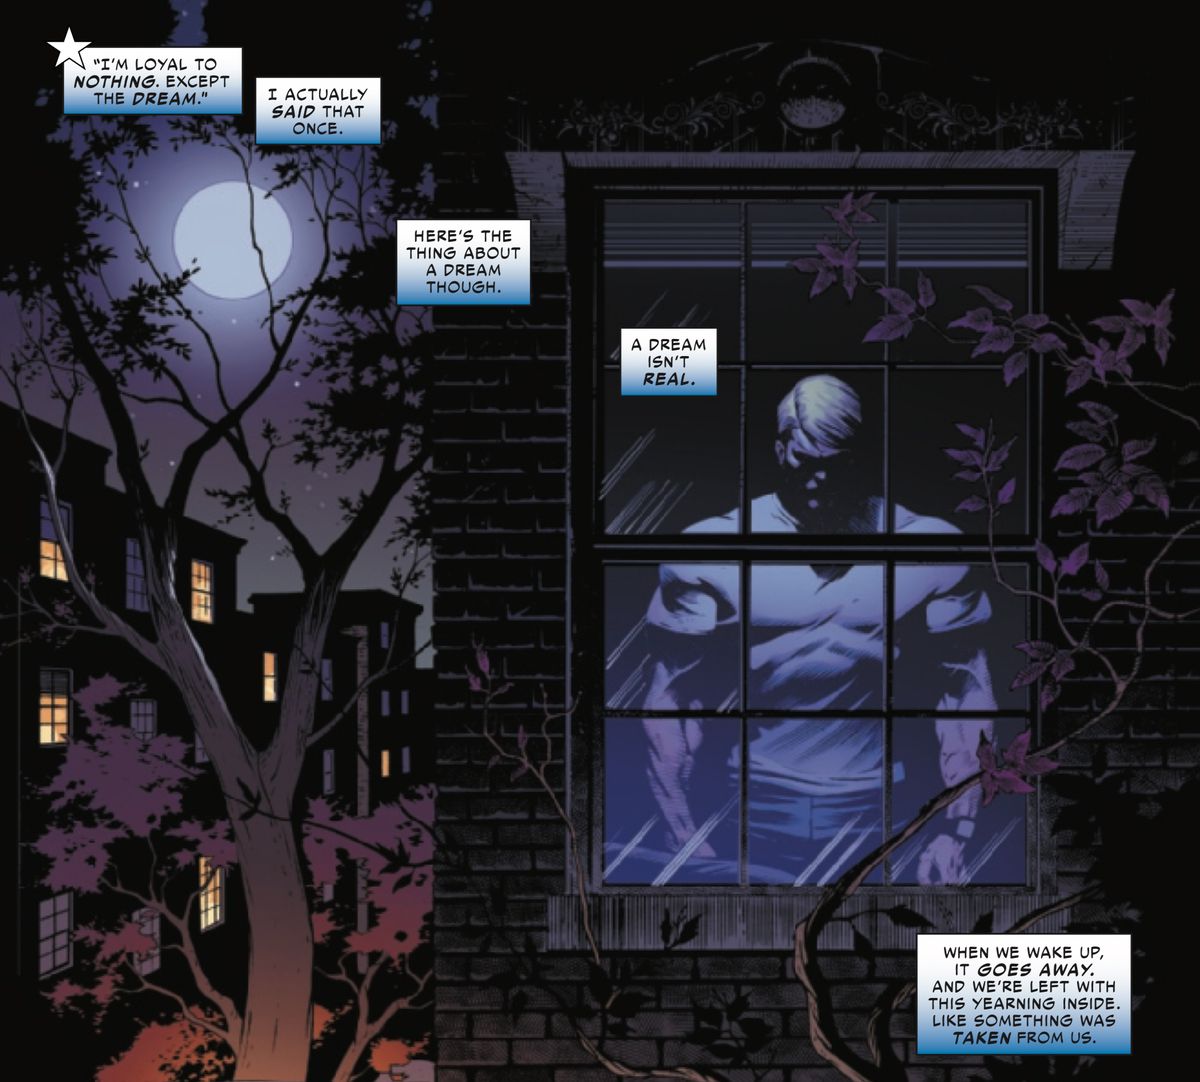 Steve Rogers sands at a dark window brooding. “‘I’m loyal to nothing. Except the dream.’ I actually said that once,” say narration boxes. “Here’s the thing about a dream though. A dream isn’t real.” In United States of Captain America #1 (2023). 